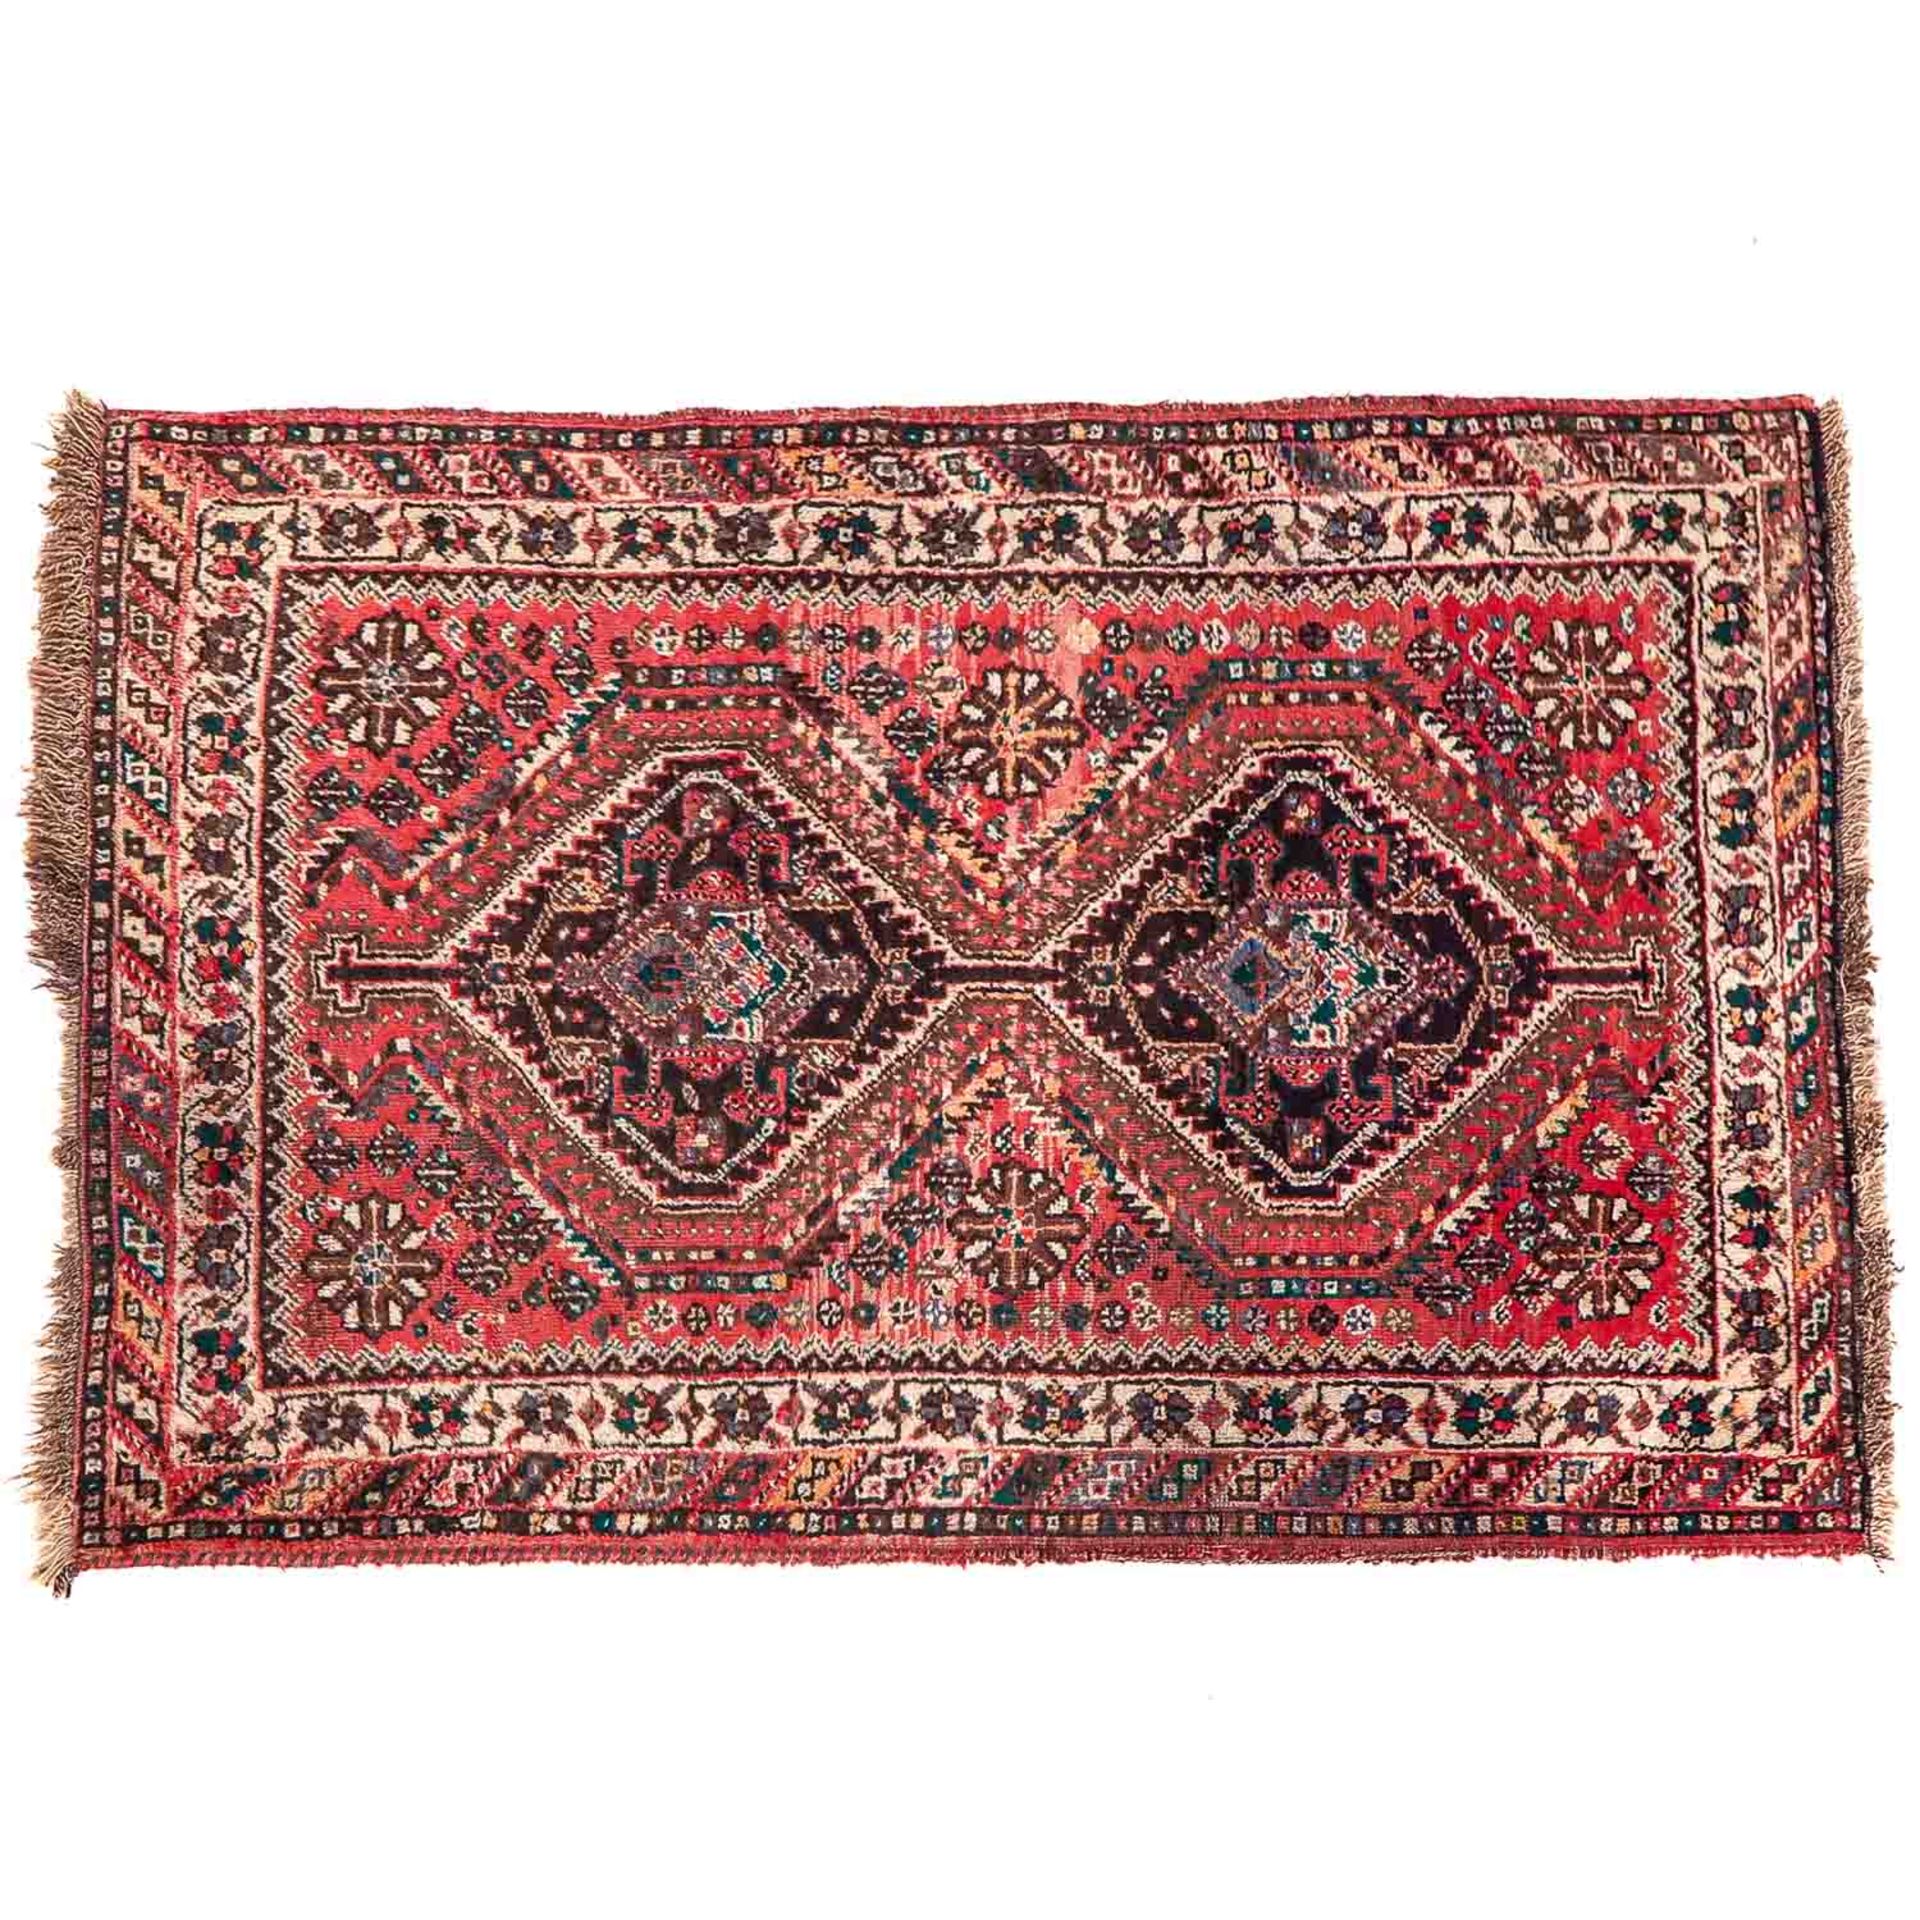 A Collection of 4 Persian Carpets - Image 4 of 9